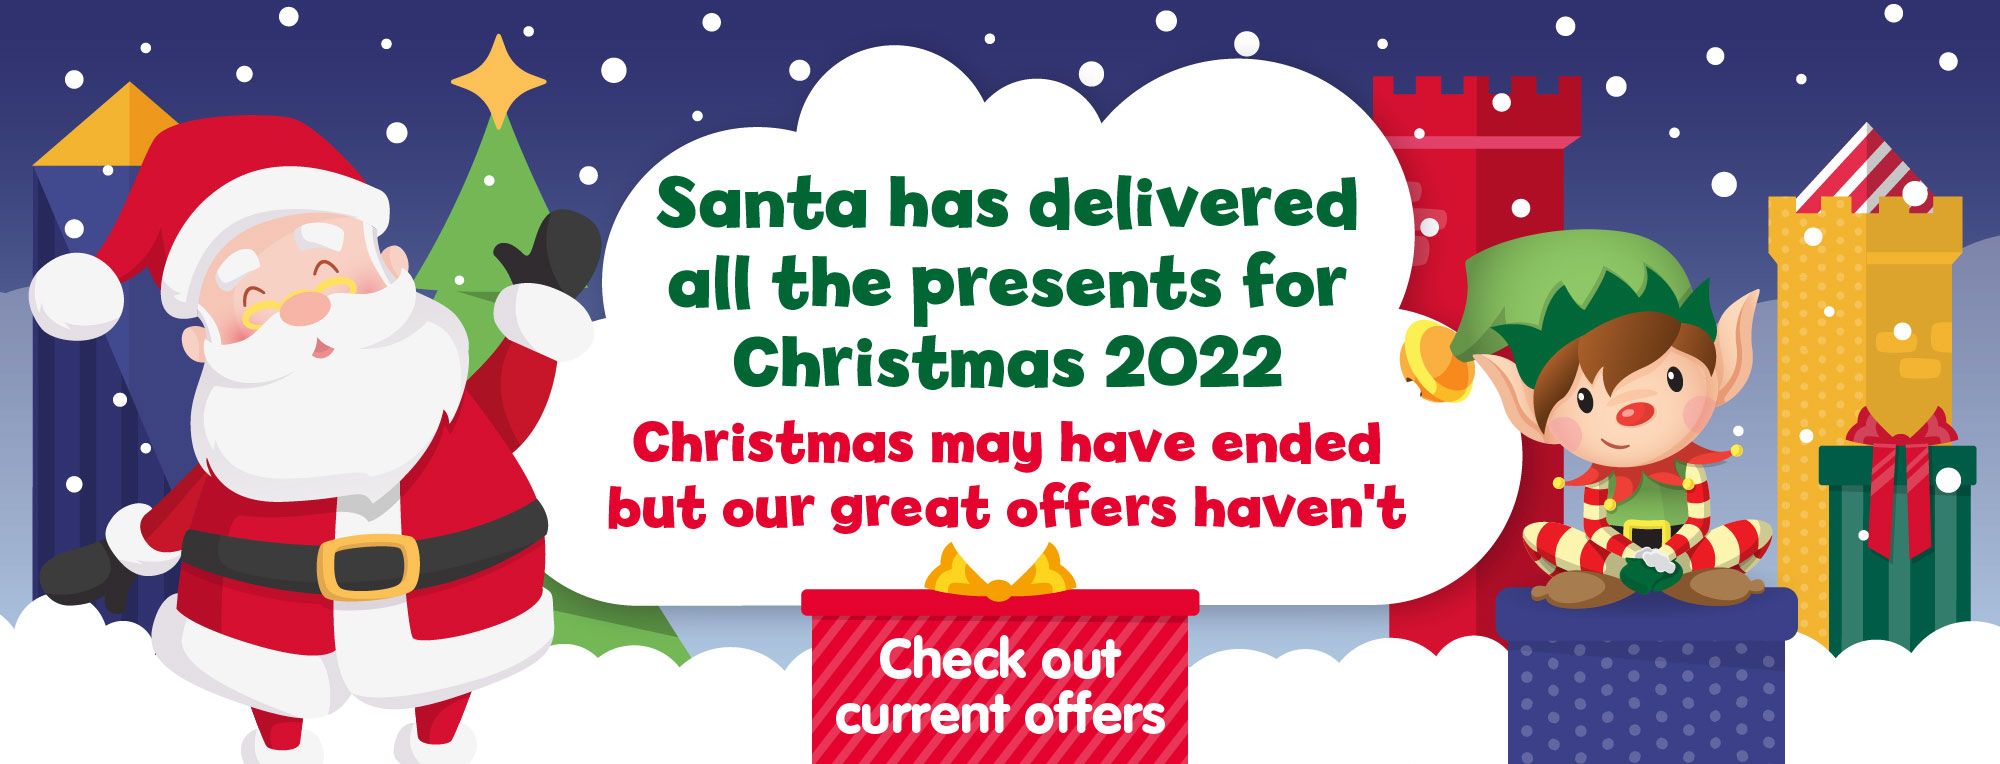 Santa has delivered all the presents for Christmas 2022. Christmas may have ended but our great offers haven't. Check out our current offers.